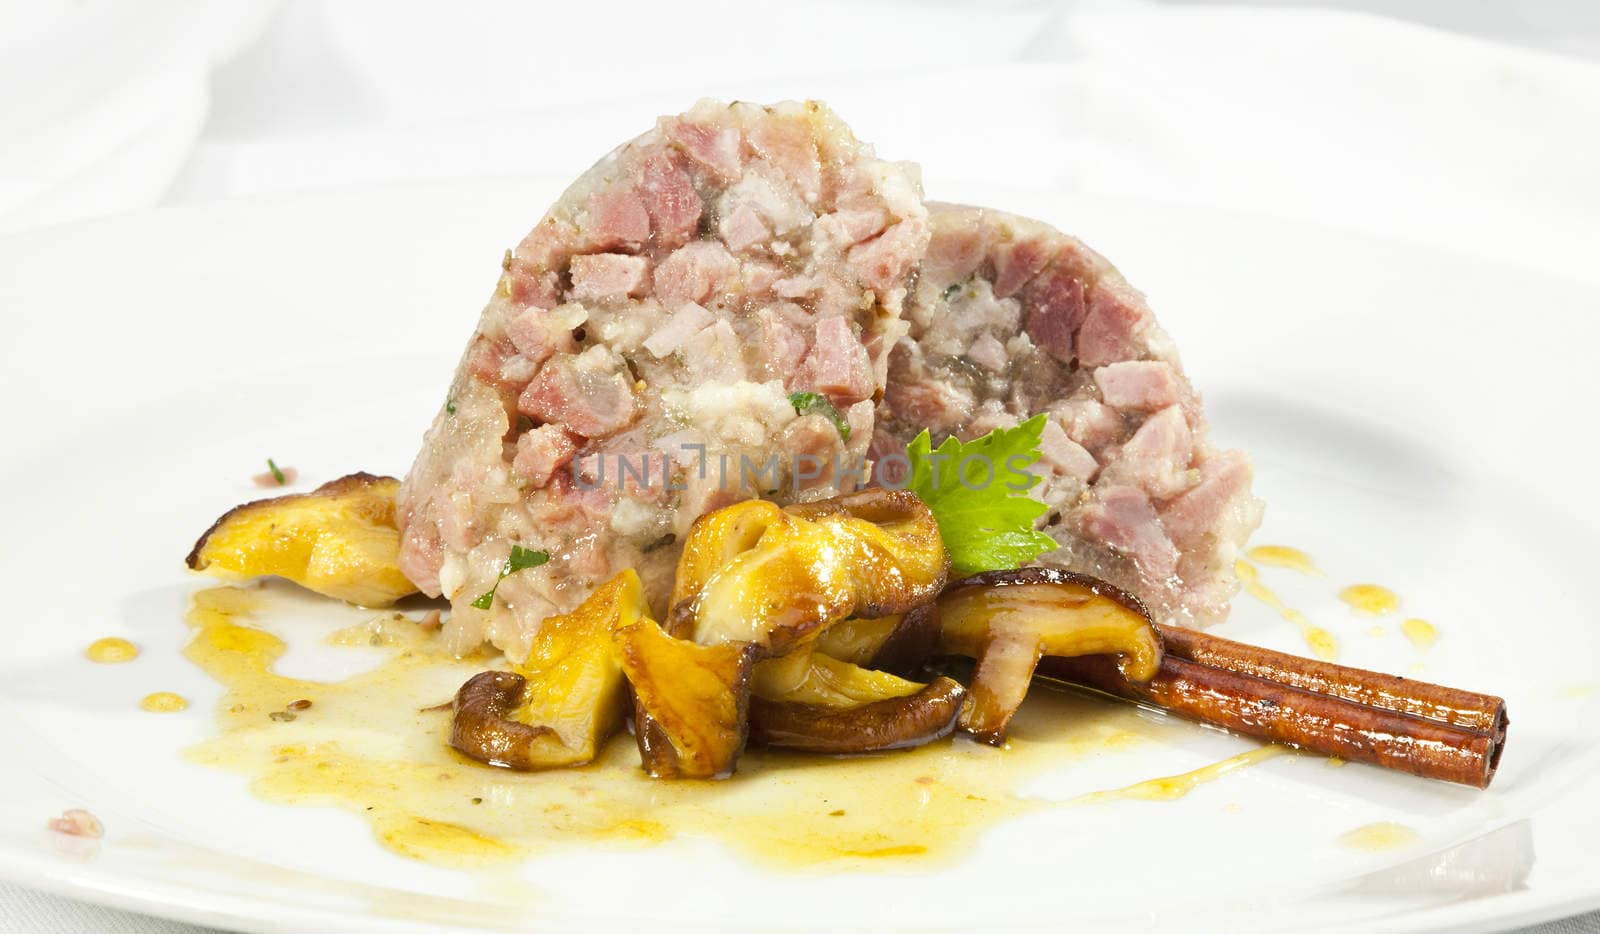 Headcheese with mushrooms by hanusst